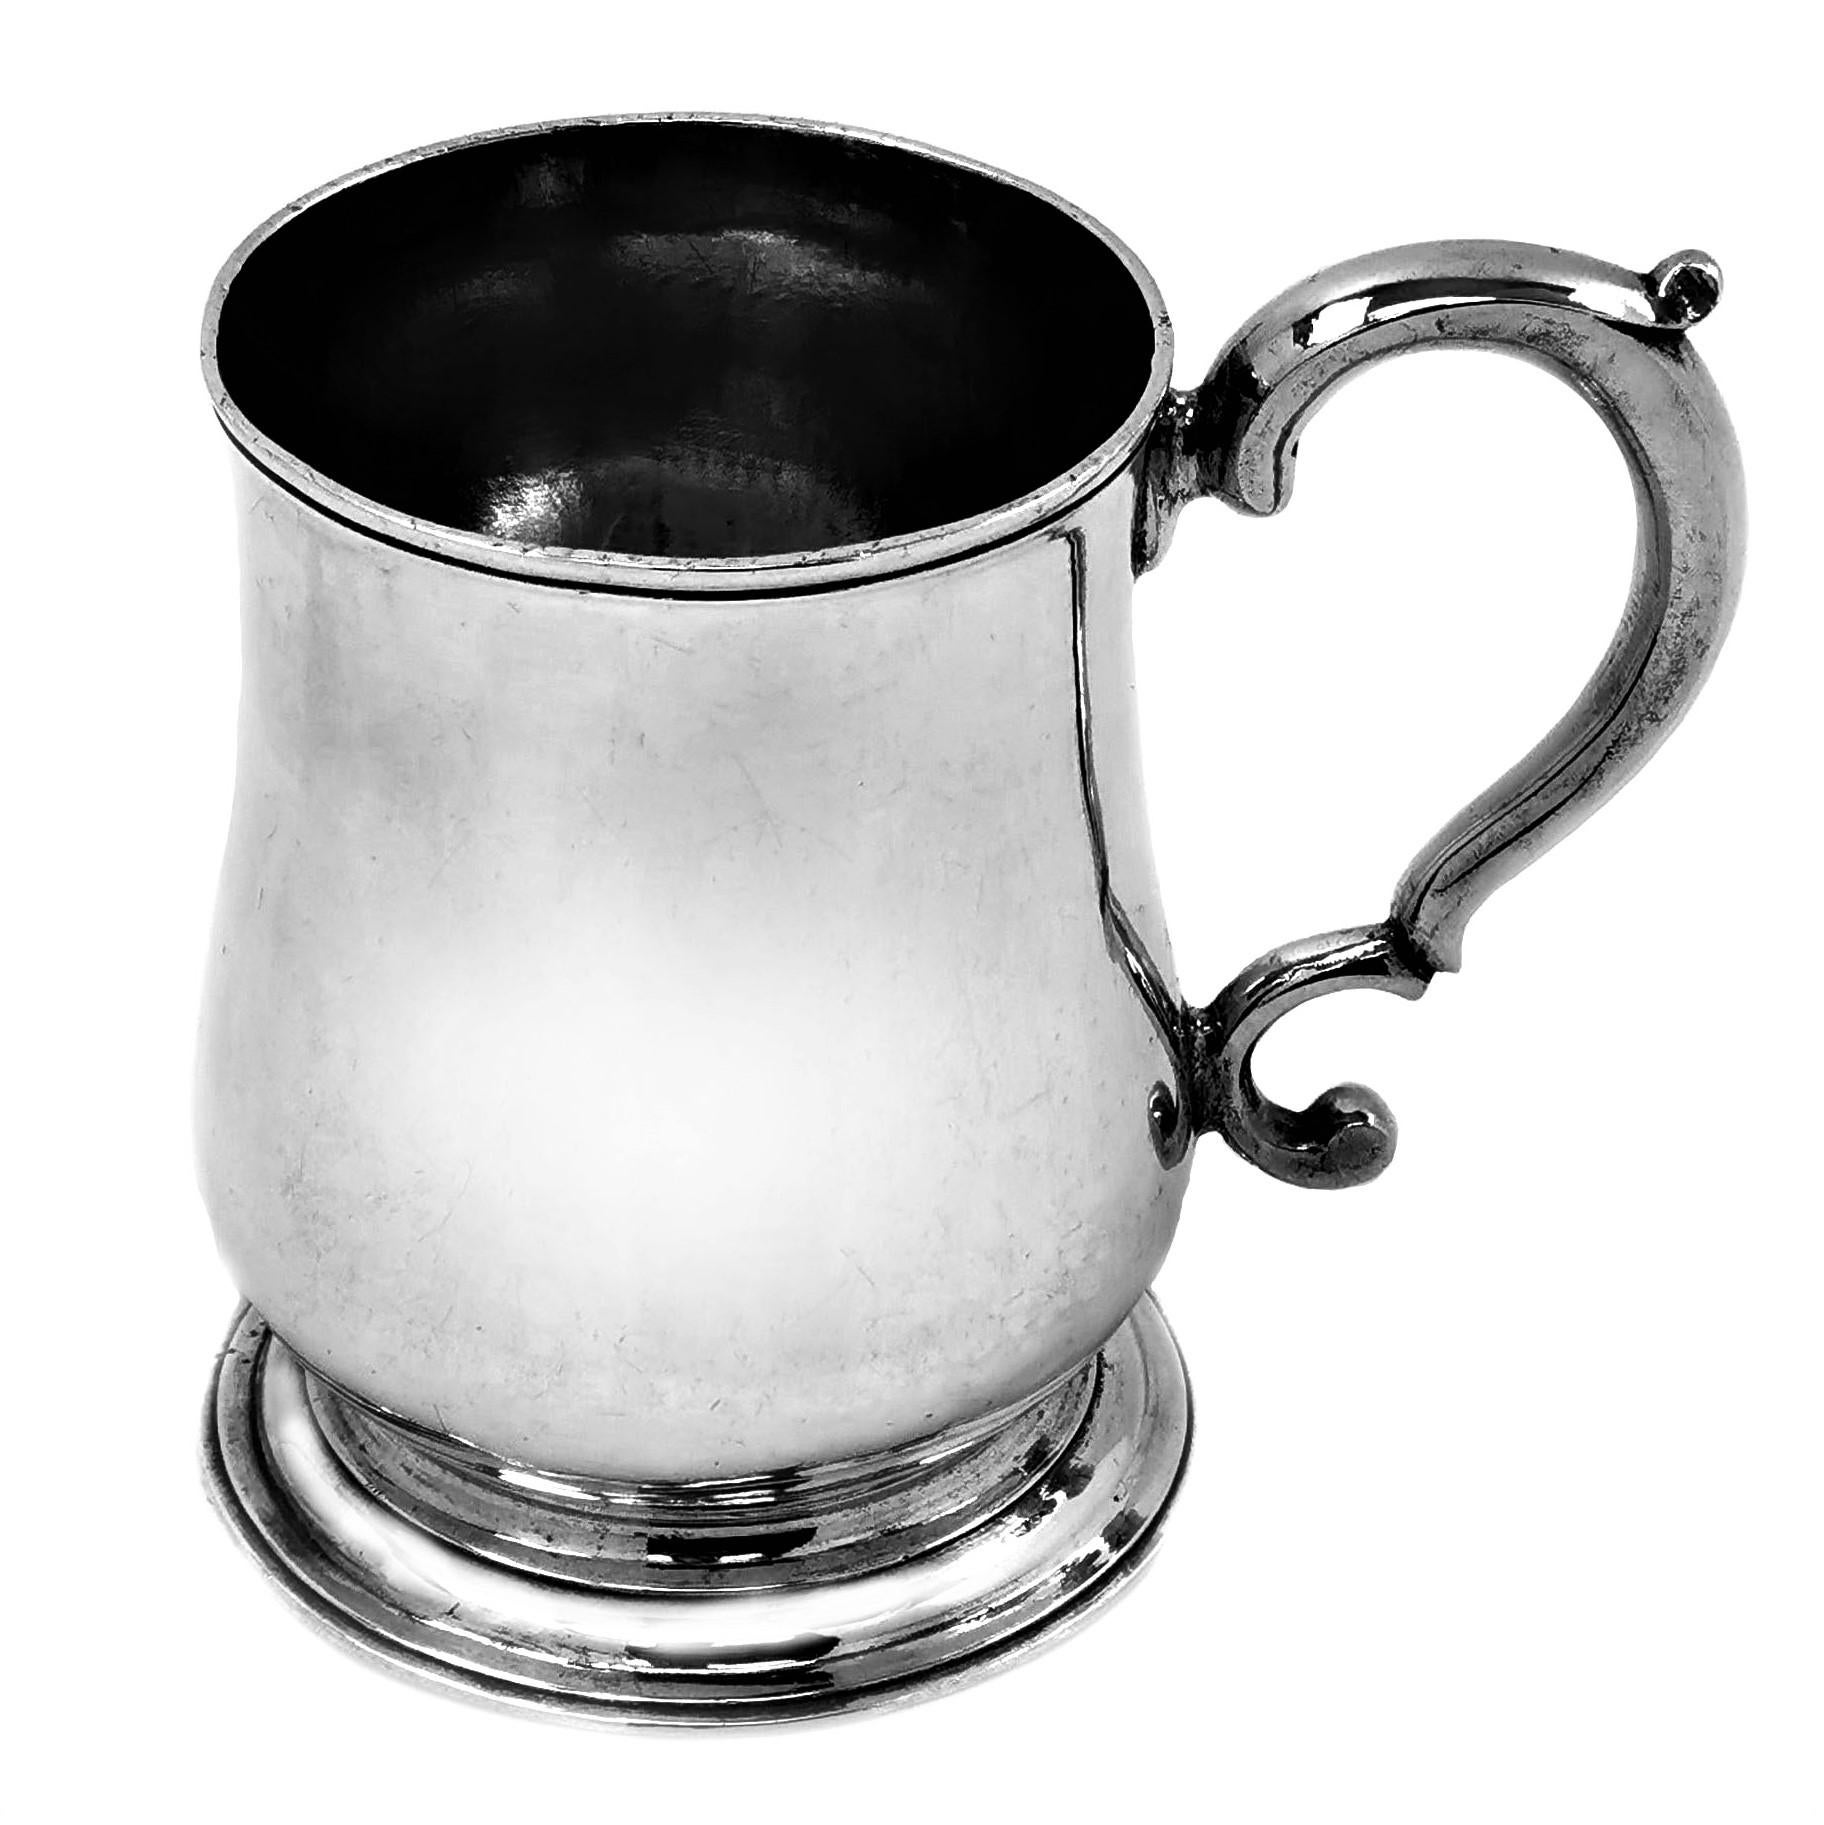 A classic Antique George II solid Silver half pint Mug with a traditional baluster form and with a scroll handle. The Mug has a plain, elegant exterior with a gorgeous patina commensurate with age and use.

Made in London in 1748, Maker